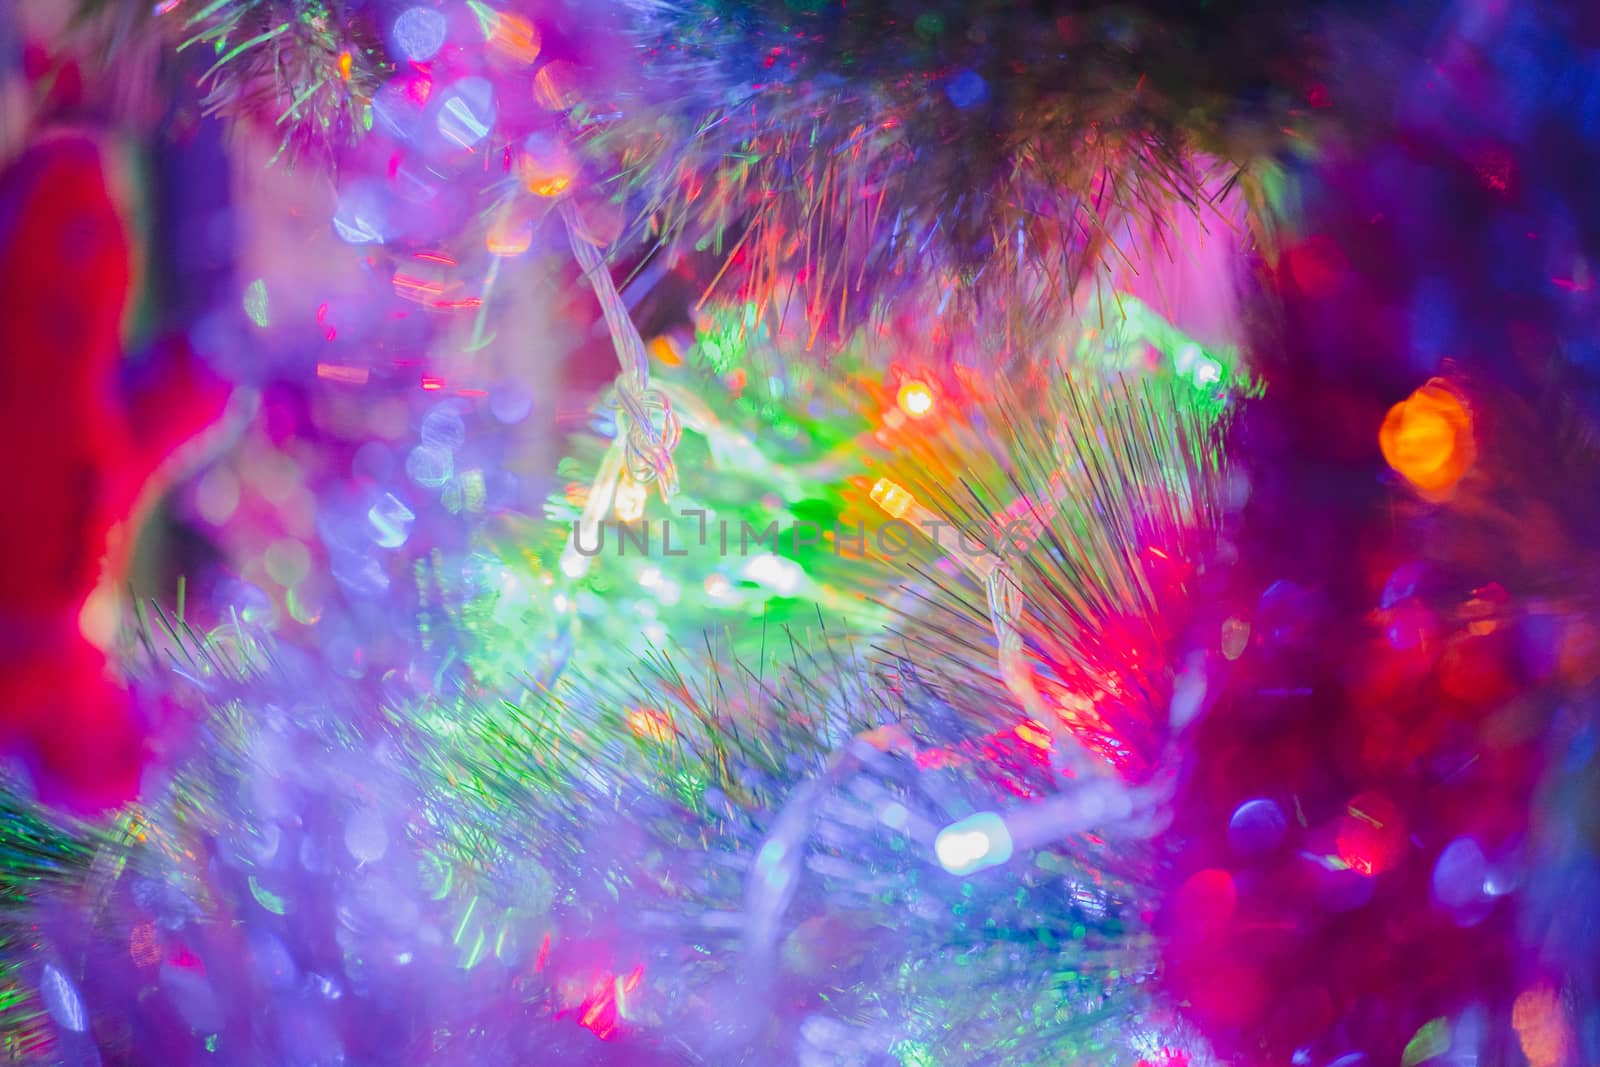 New Year lights in fir tree branches, close-up view. Detailed shot of Christmas tinsel and decorations